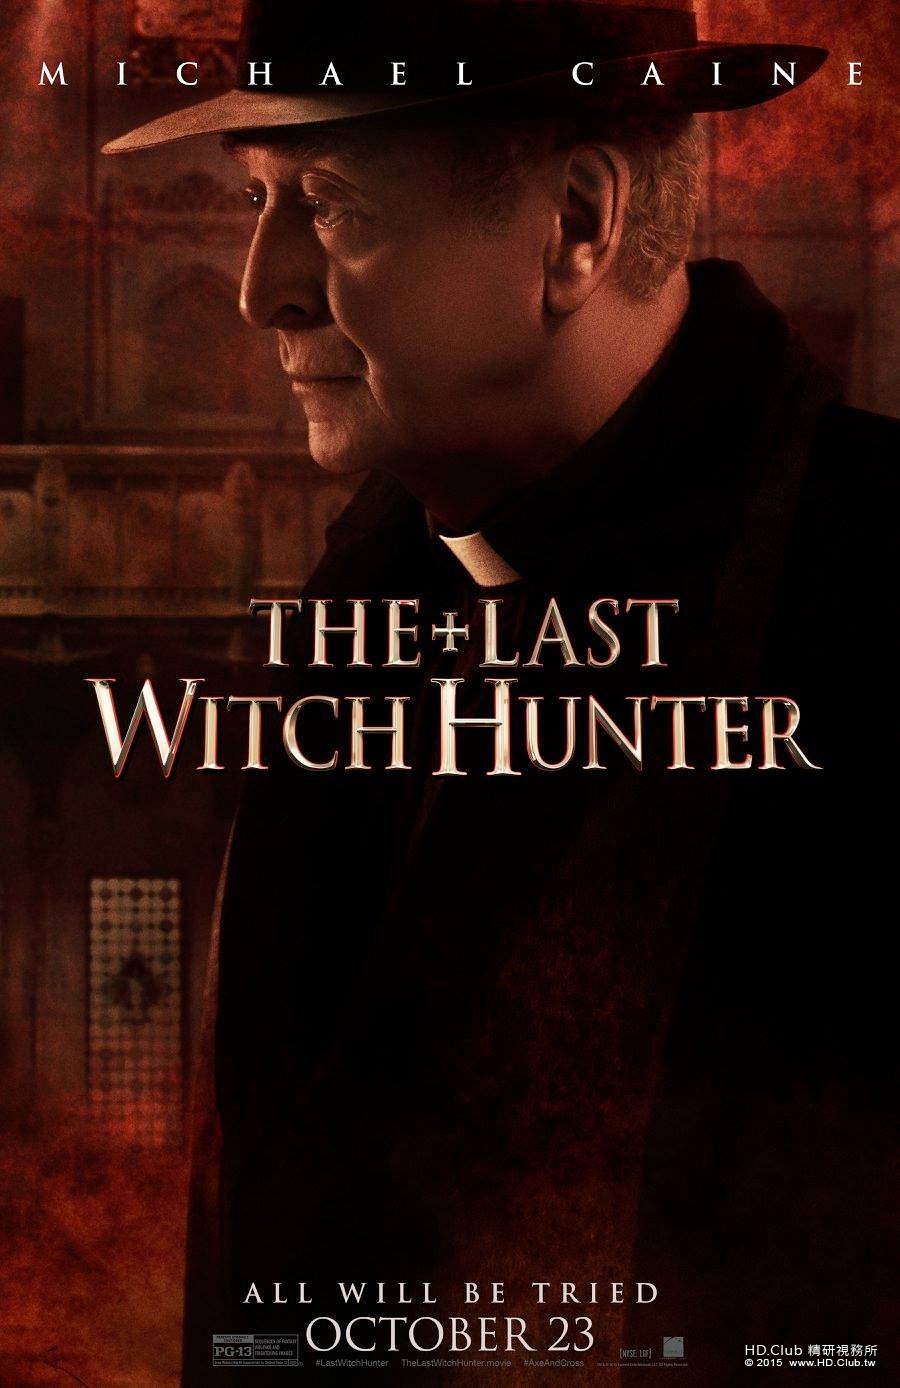 the-last-witch-hunter-poster-diesel-cain.jpg